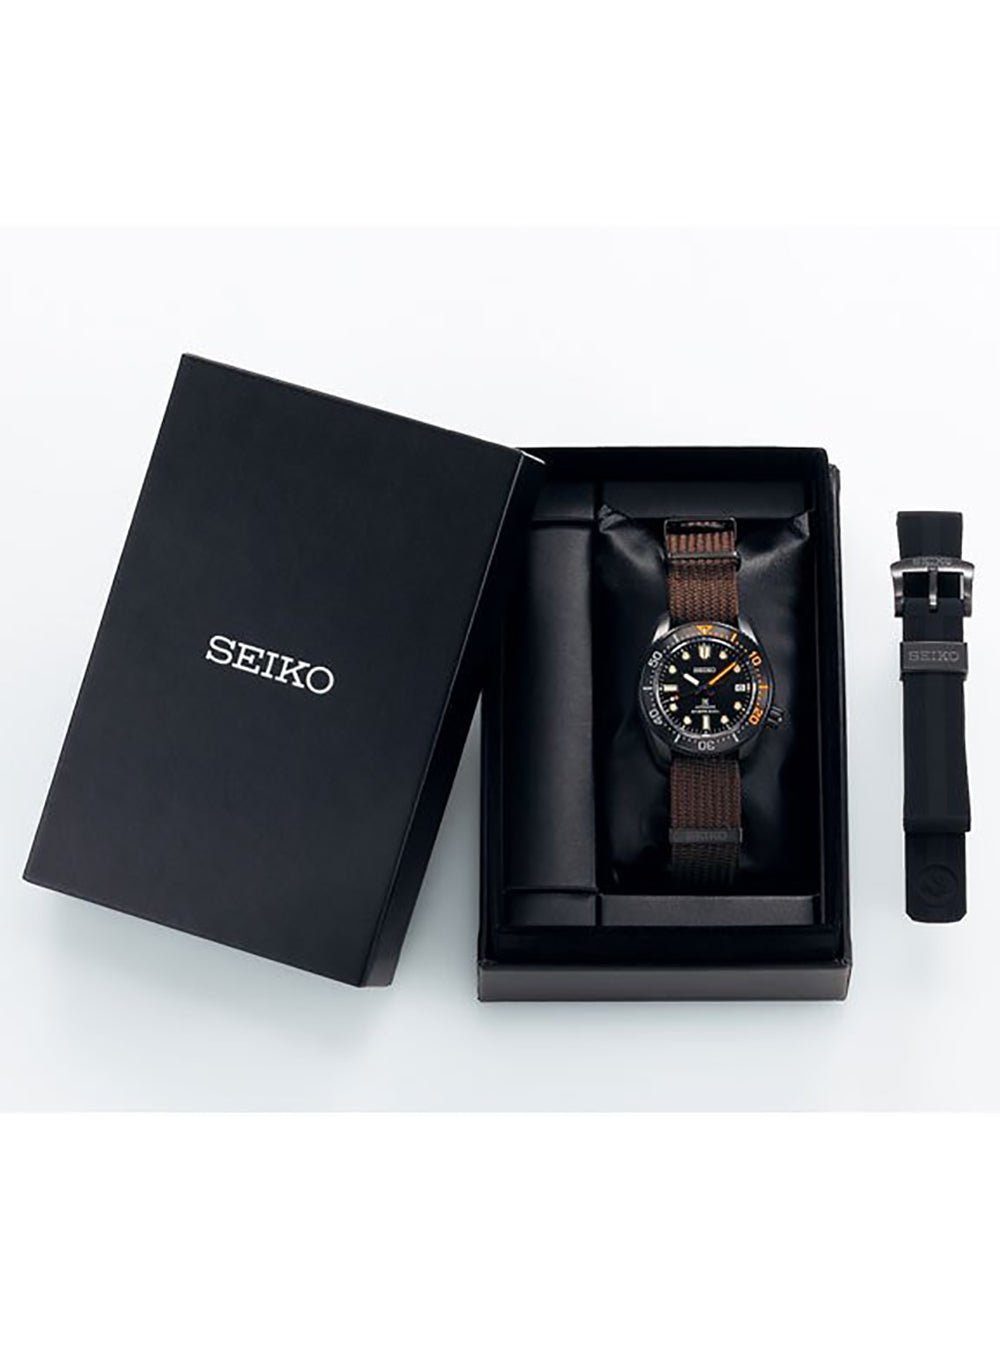 SEIKO PROSPEX THE BLACK SERIES LIMITED EDITION SBDC155 MADE IN JAPAN JDM